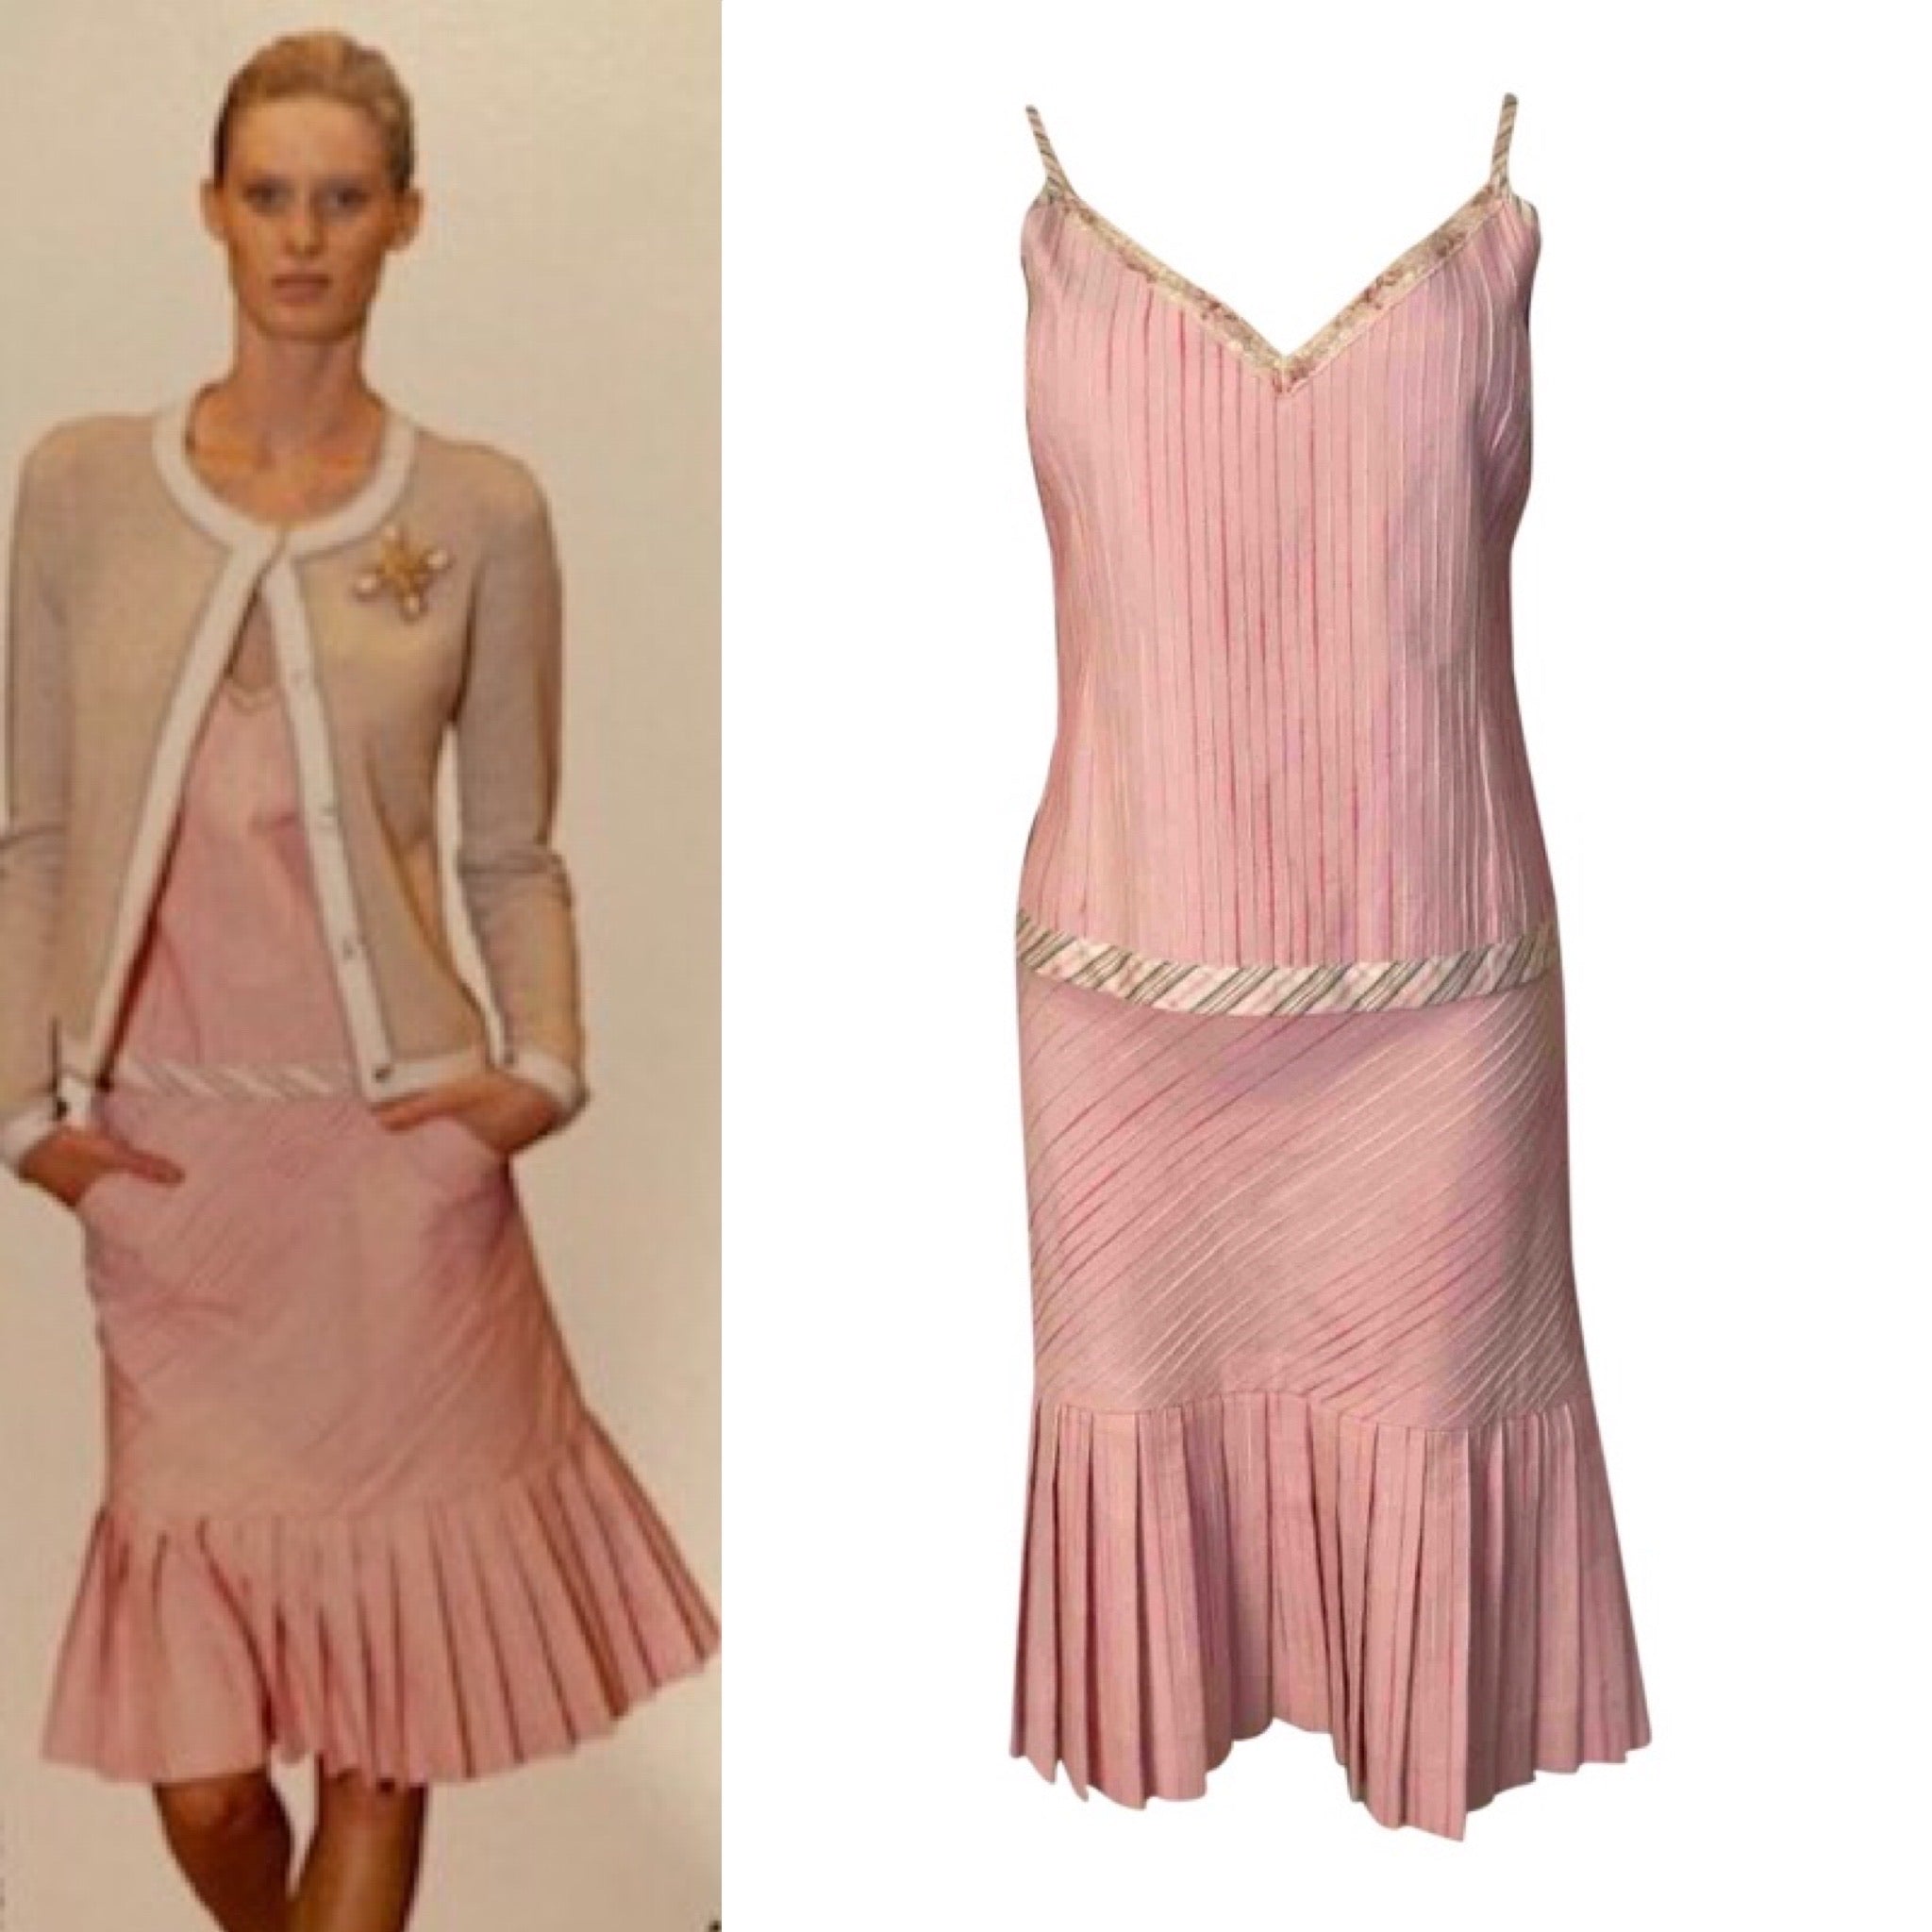 HelensChanel Chanel 03p, 2003 Spring Pink Camisole Top Matching Pleated Accordion Skirt Set FR 42 US 8